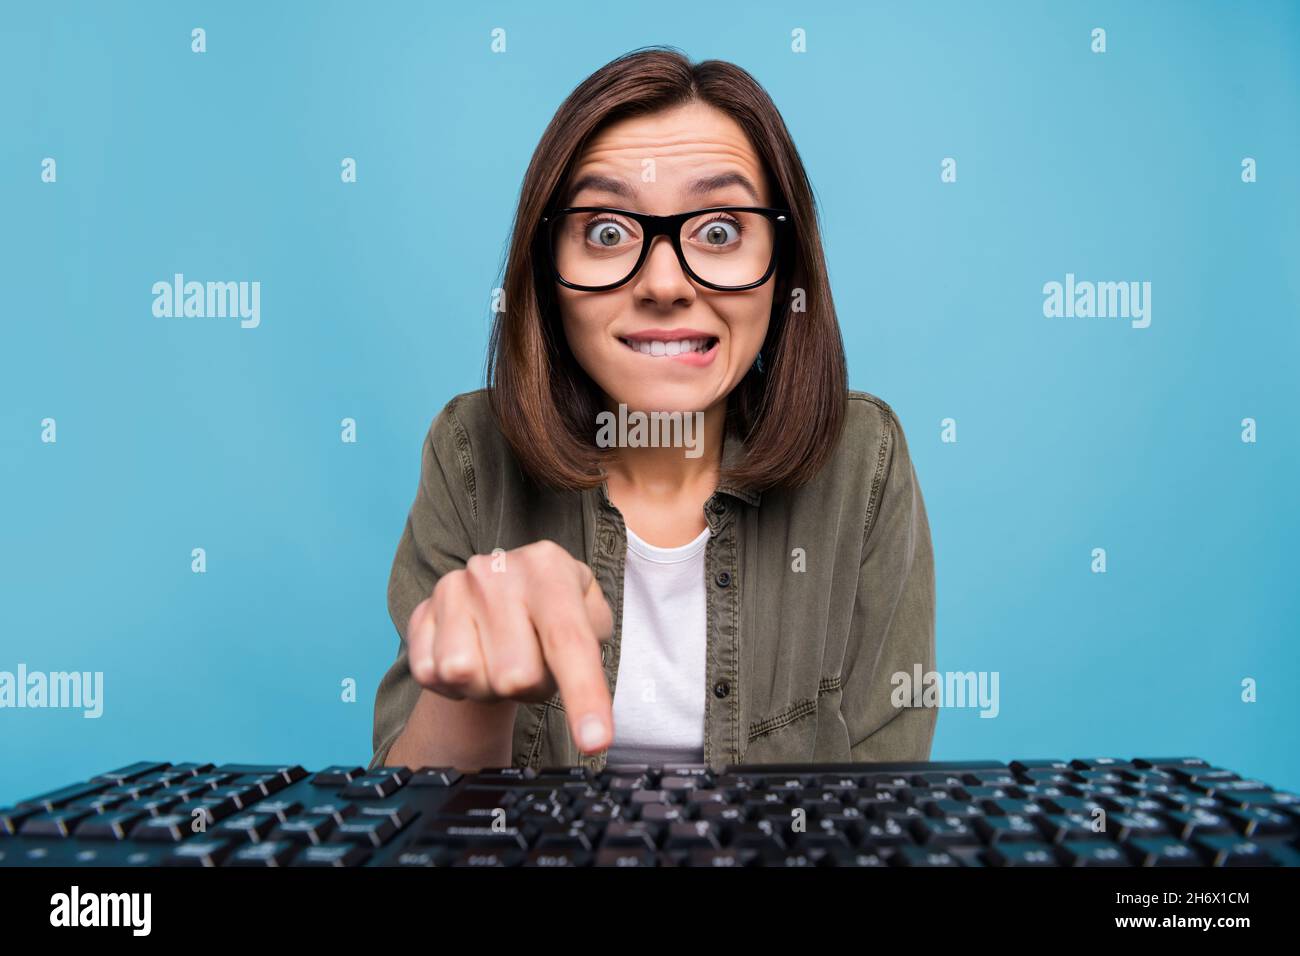 Portrait of anxious computer nerd lady press keyboard button look webcam social media isolated over blue color background Stock Photo